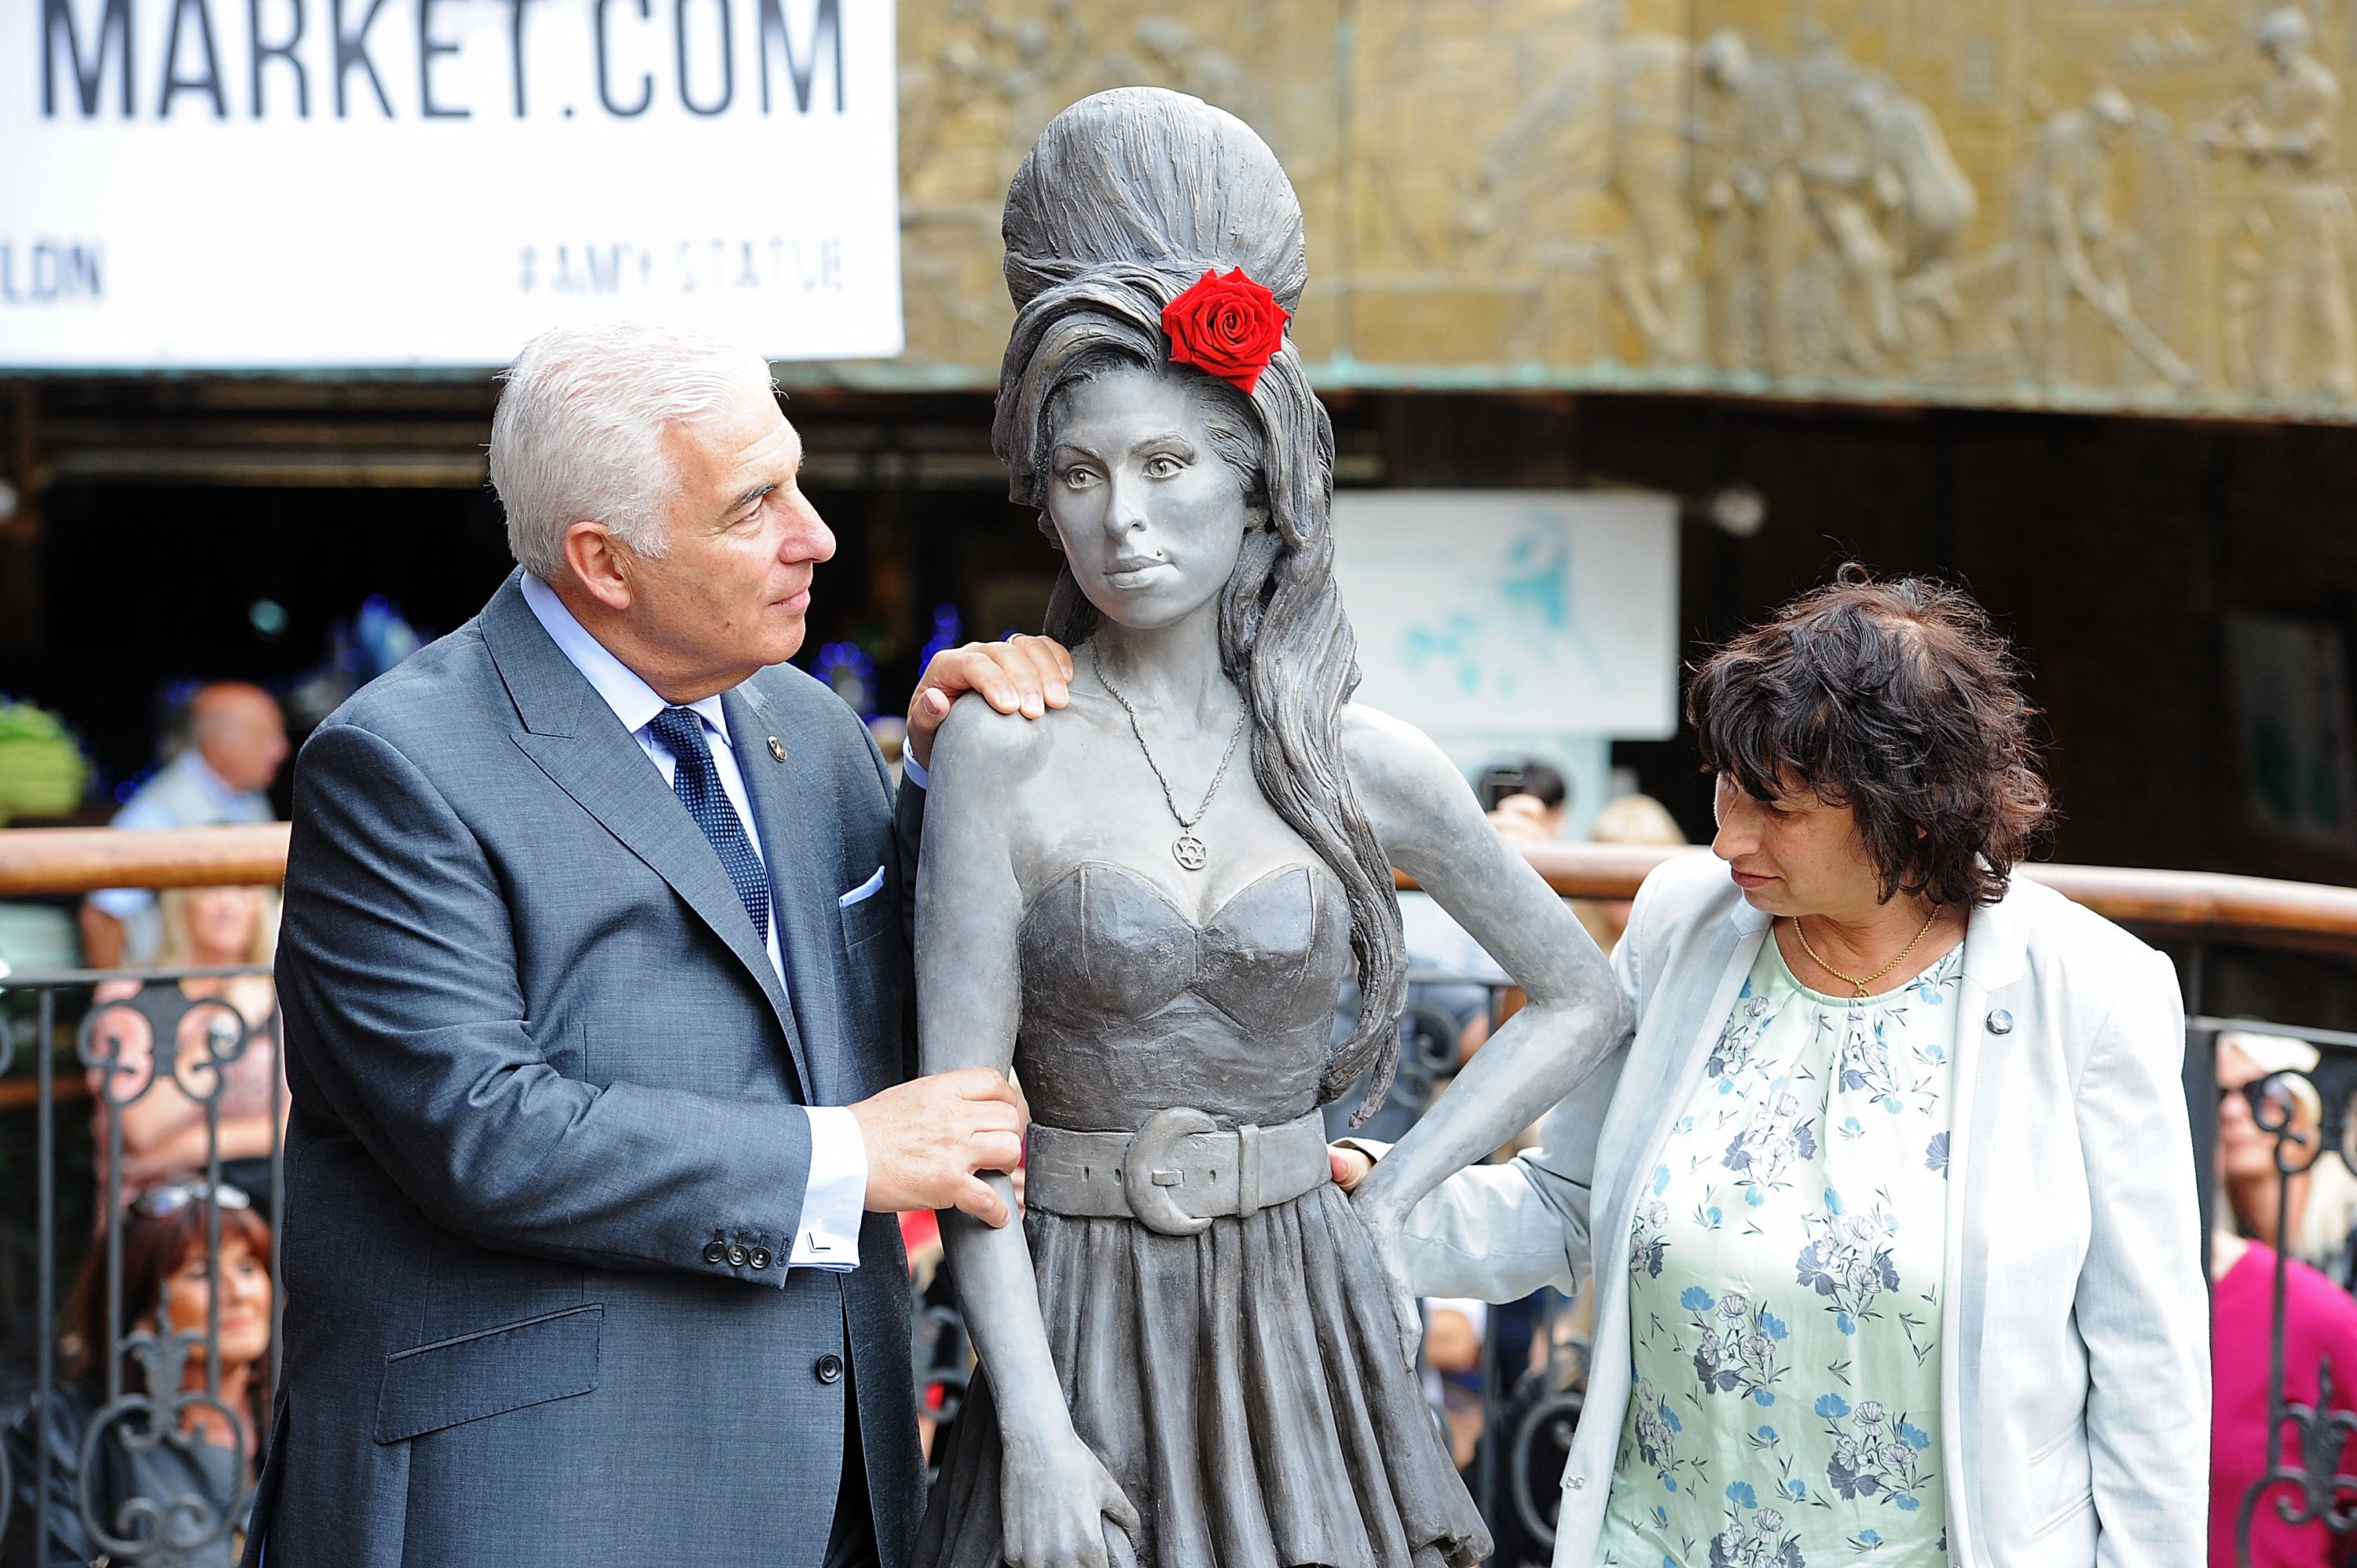 ‘Amy Winehouse being a famous Jew was enough to make her statue a target’